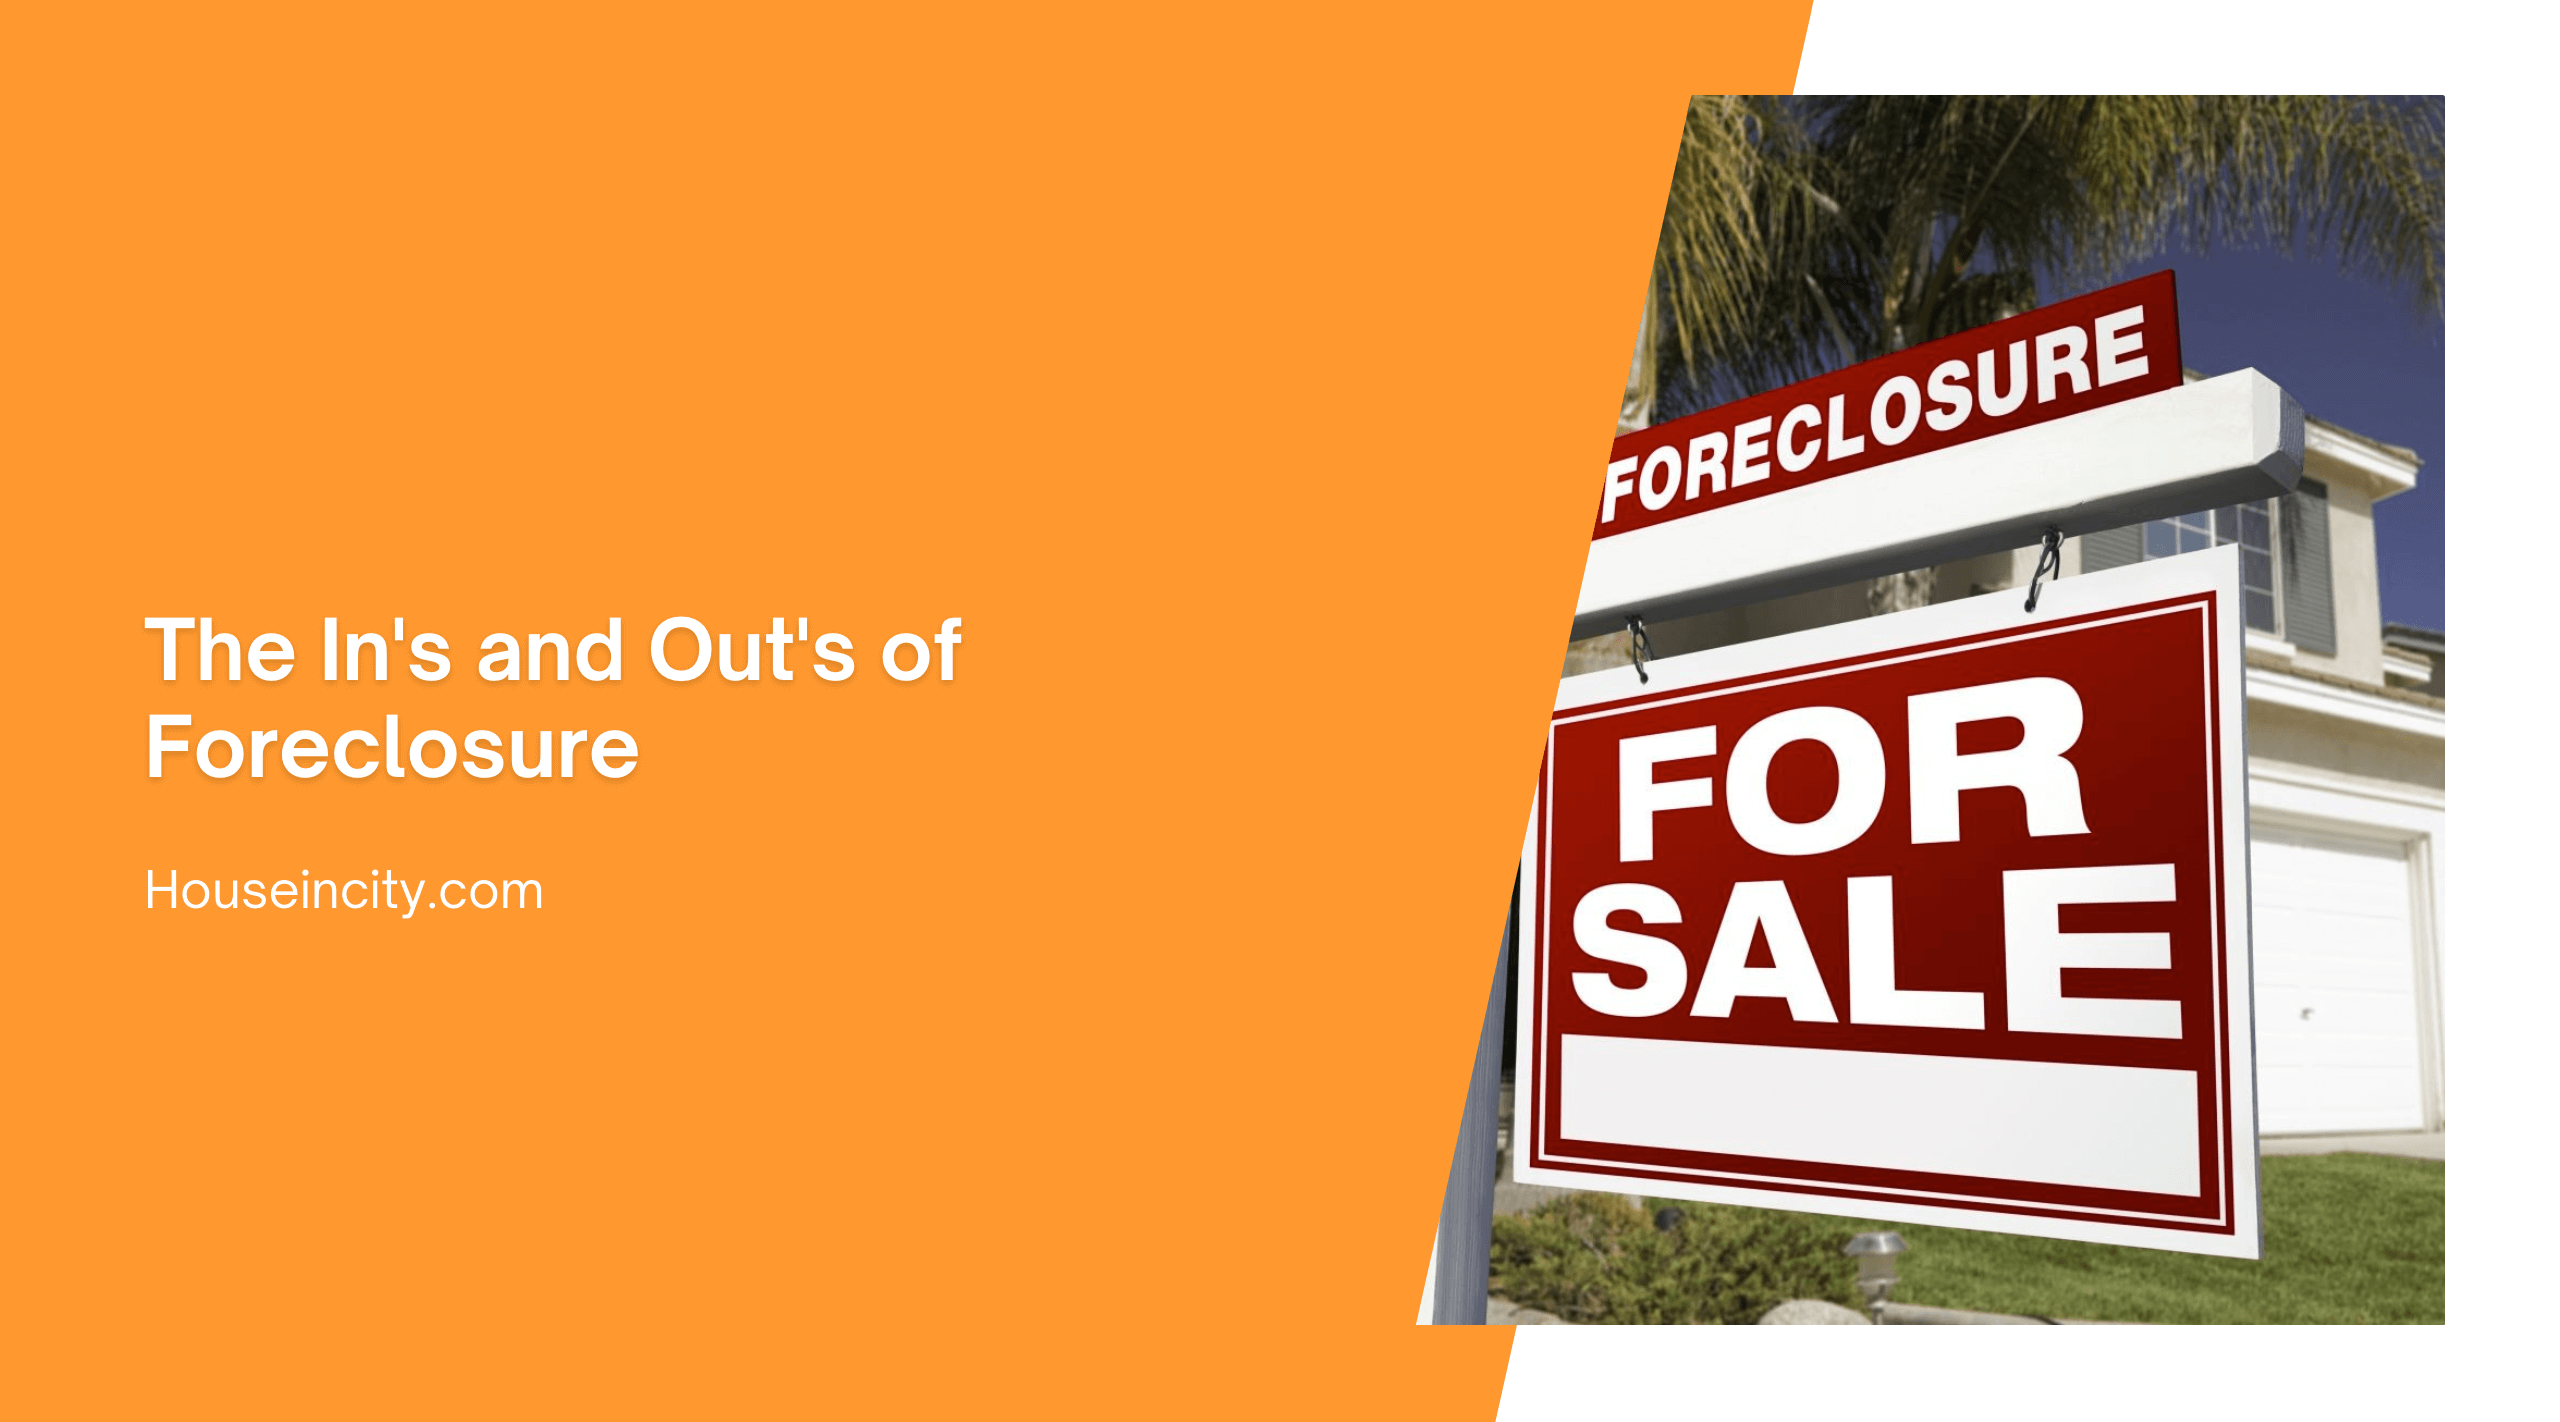 The In's and Out's of Foreclosure